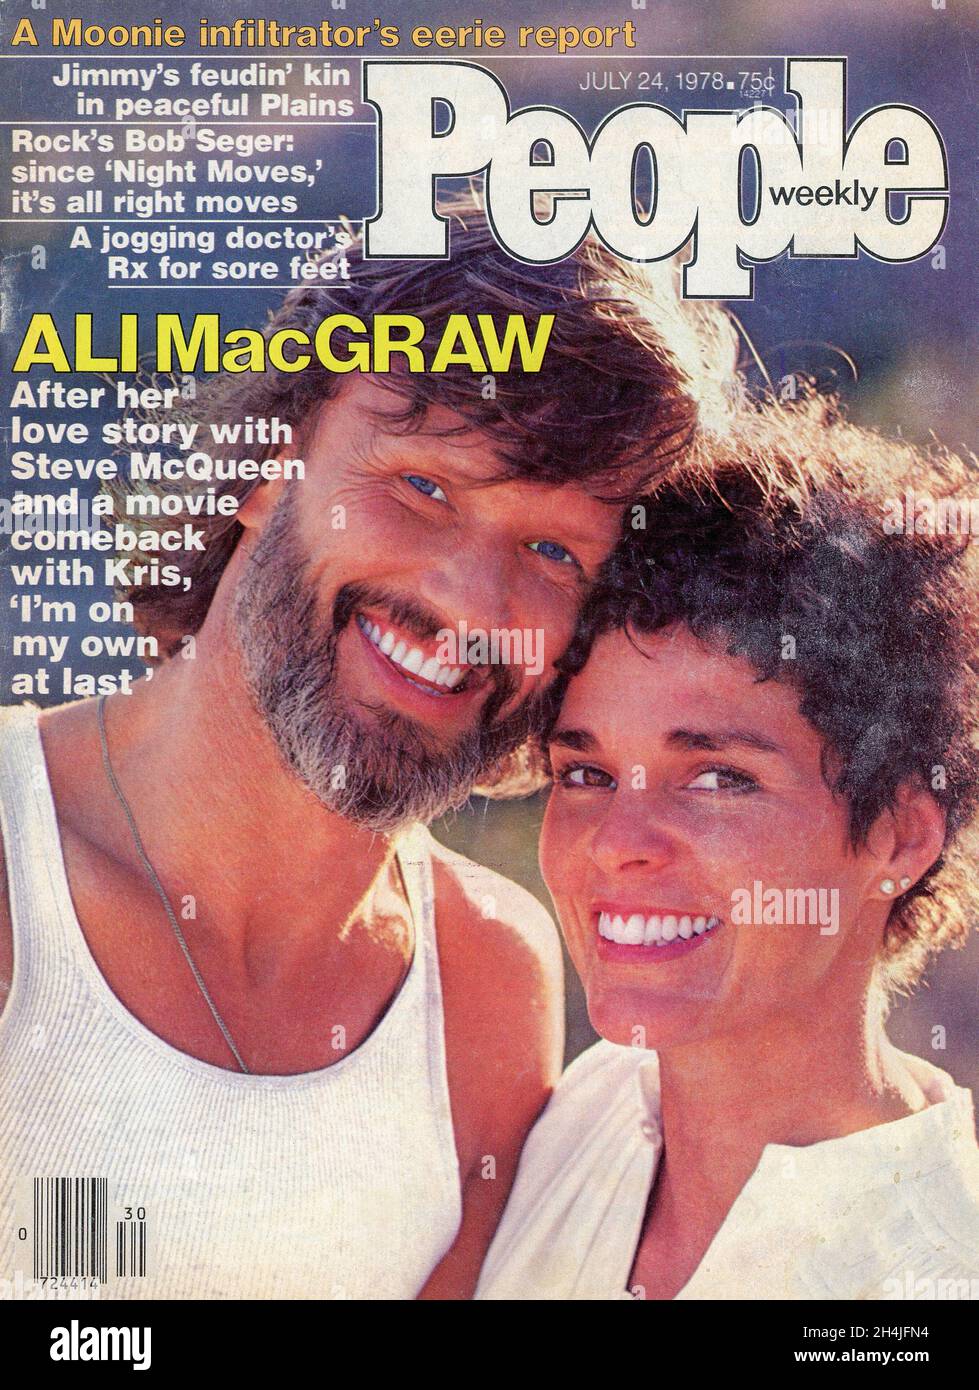 24 July 1978 issue of 'People' Magazine Cover, USA Stock Photo